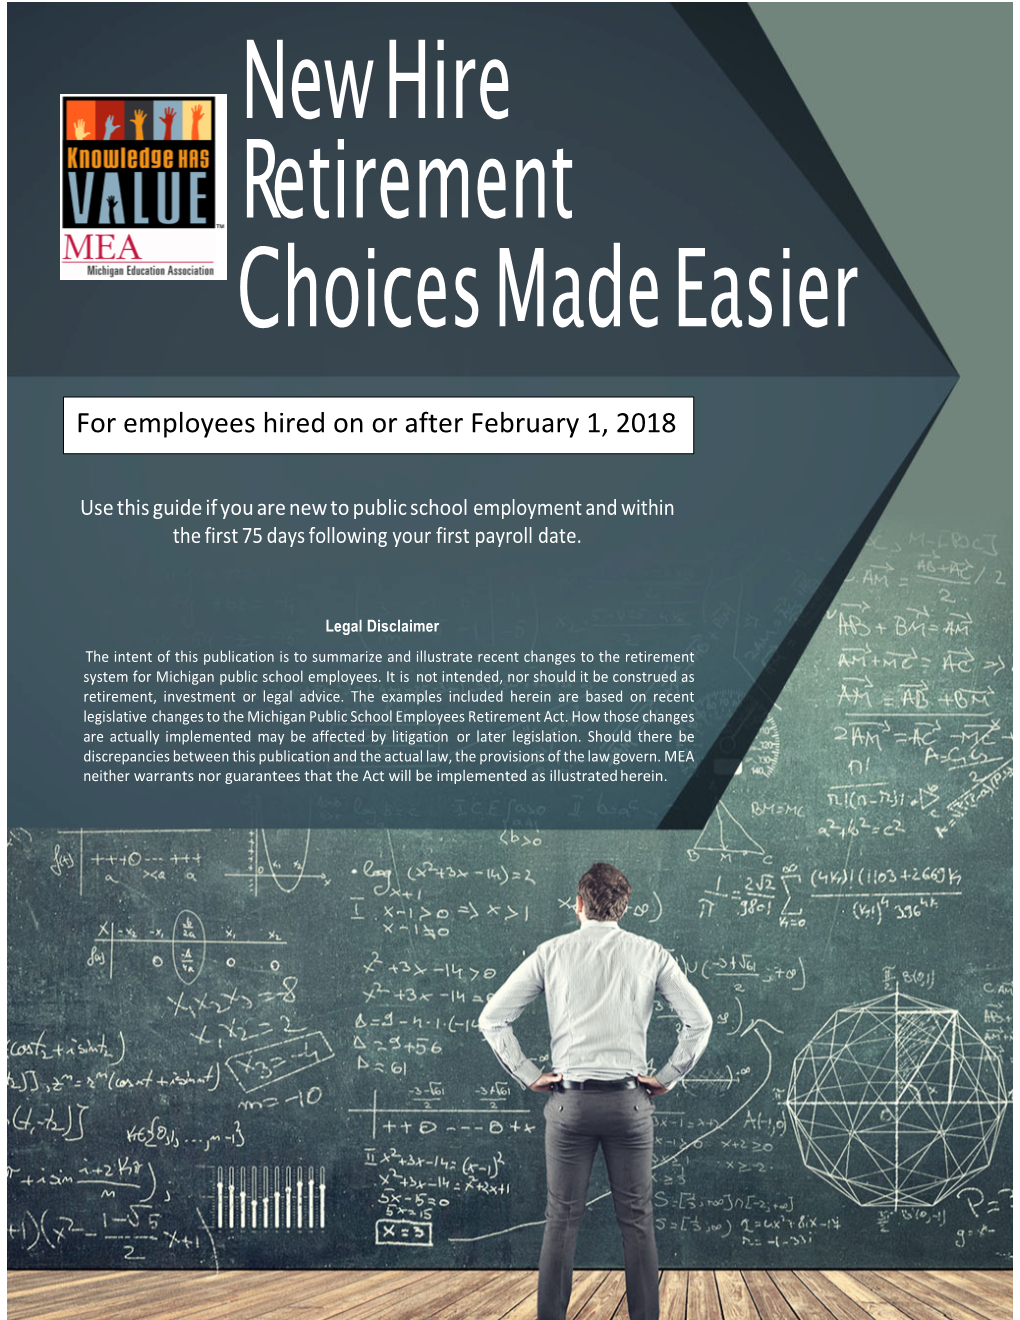 New Hire Retirement Choices Made Easier